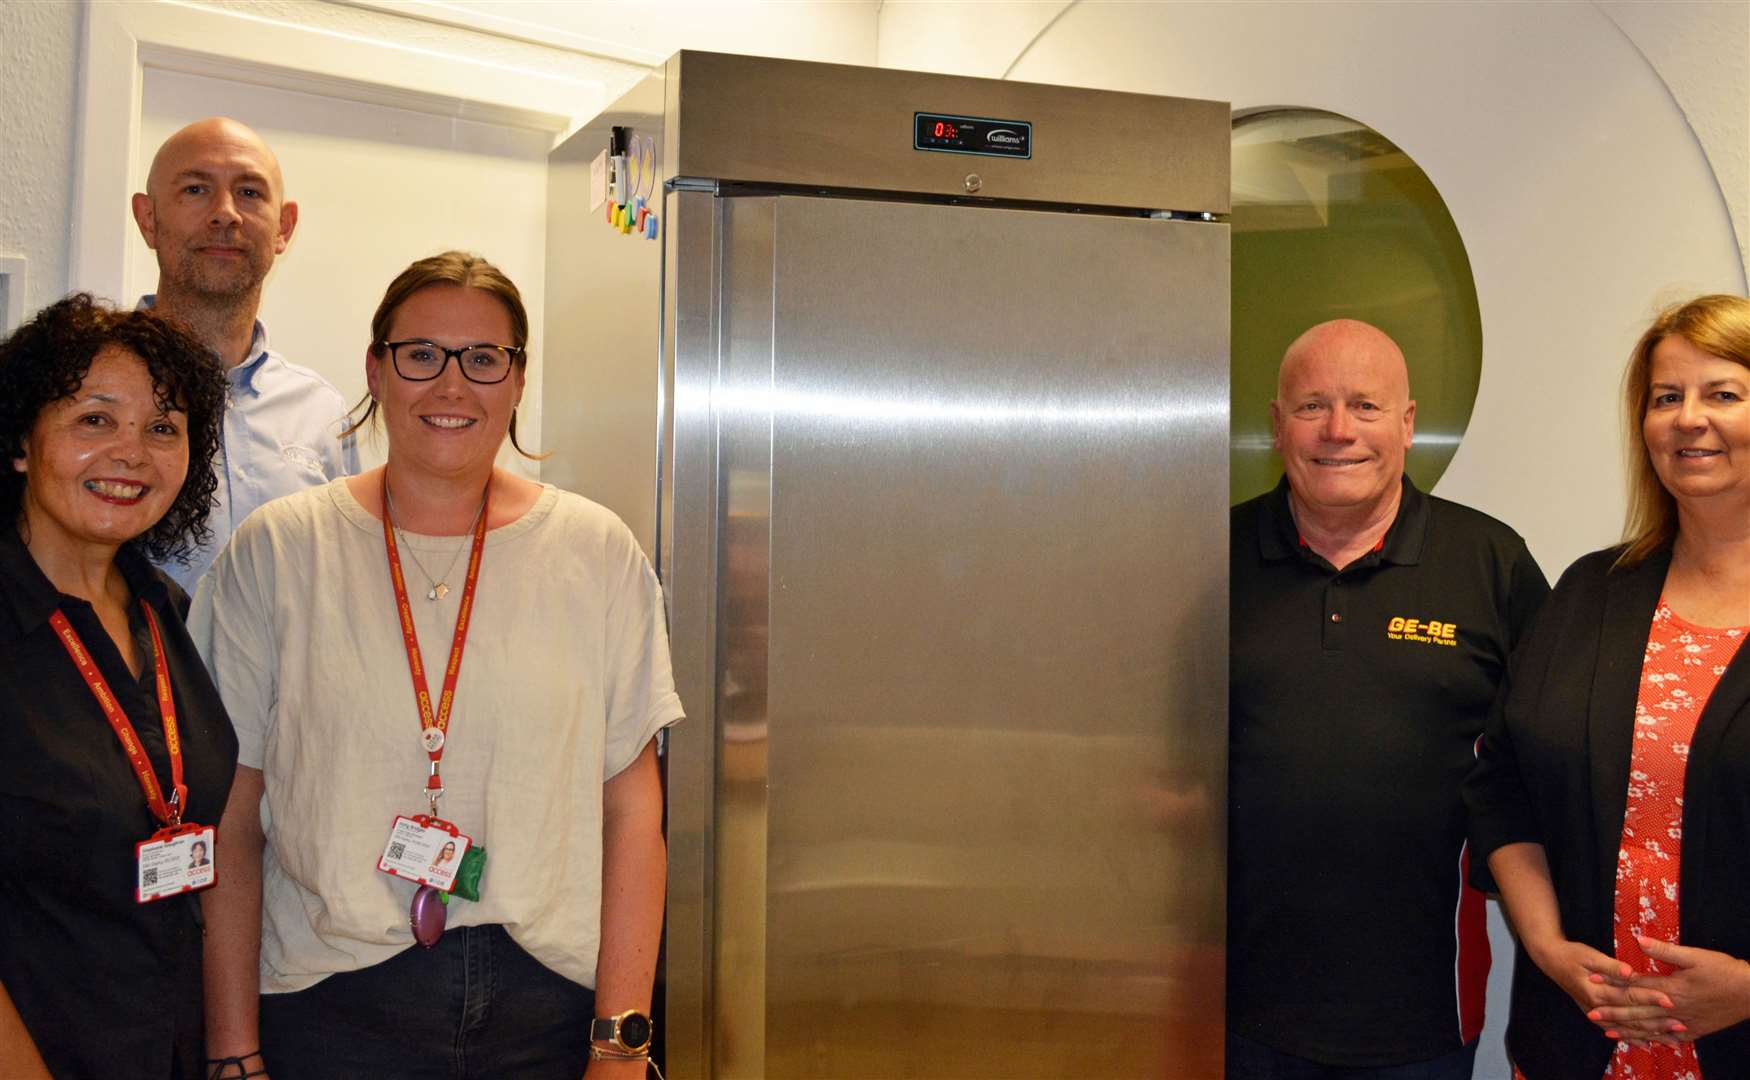 Williams Refrigeration donates a fridge to the Steam House Café to support people with their mental health and wellbeing